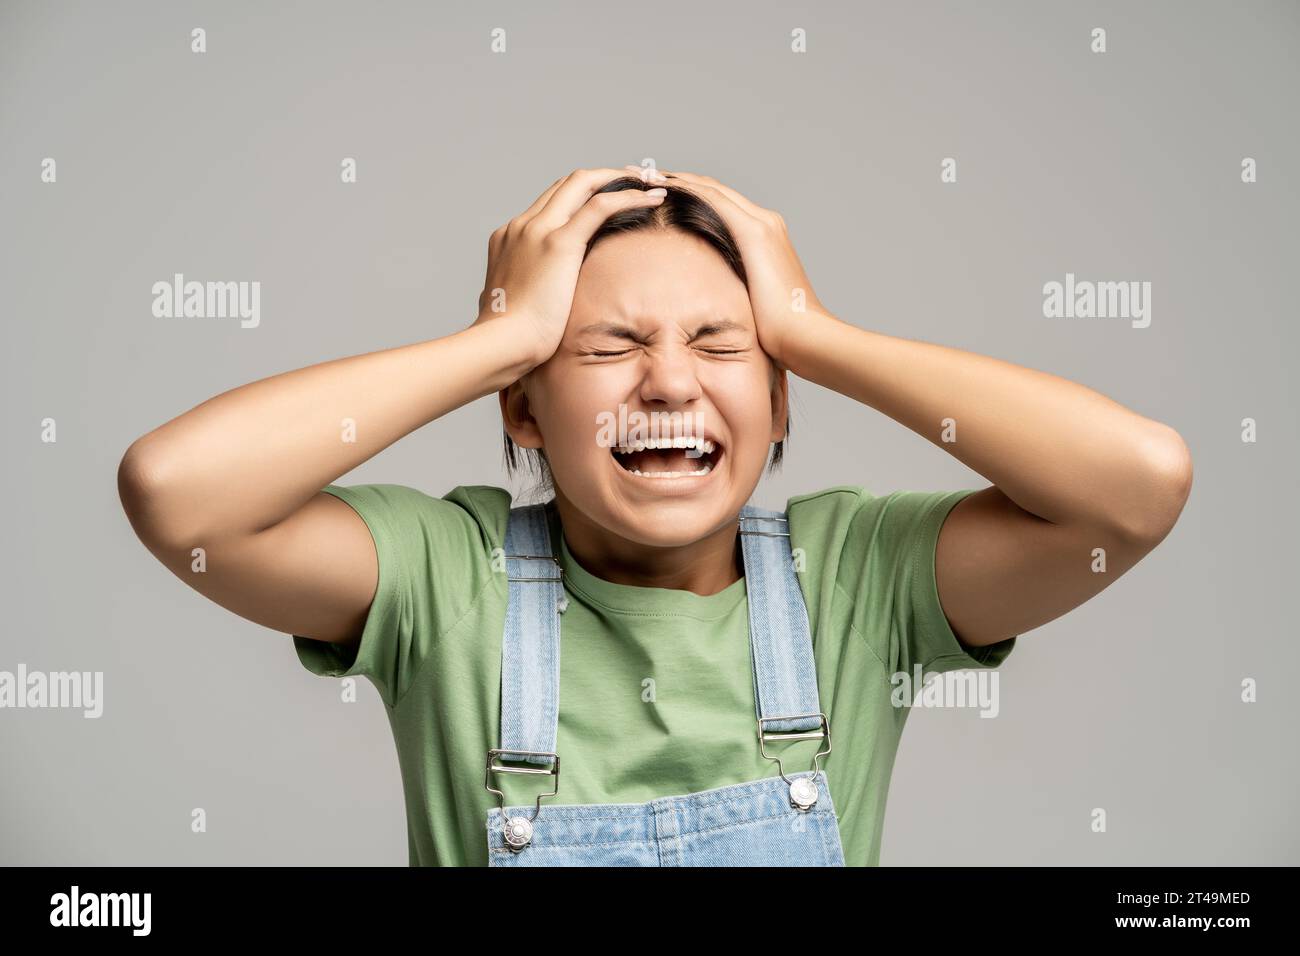 Desperated teen girl shouting holding head feeling intensive negative emotions on gray background.  Stock Photo